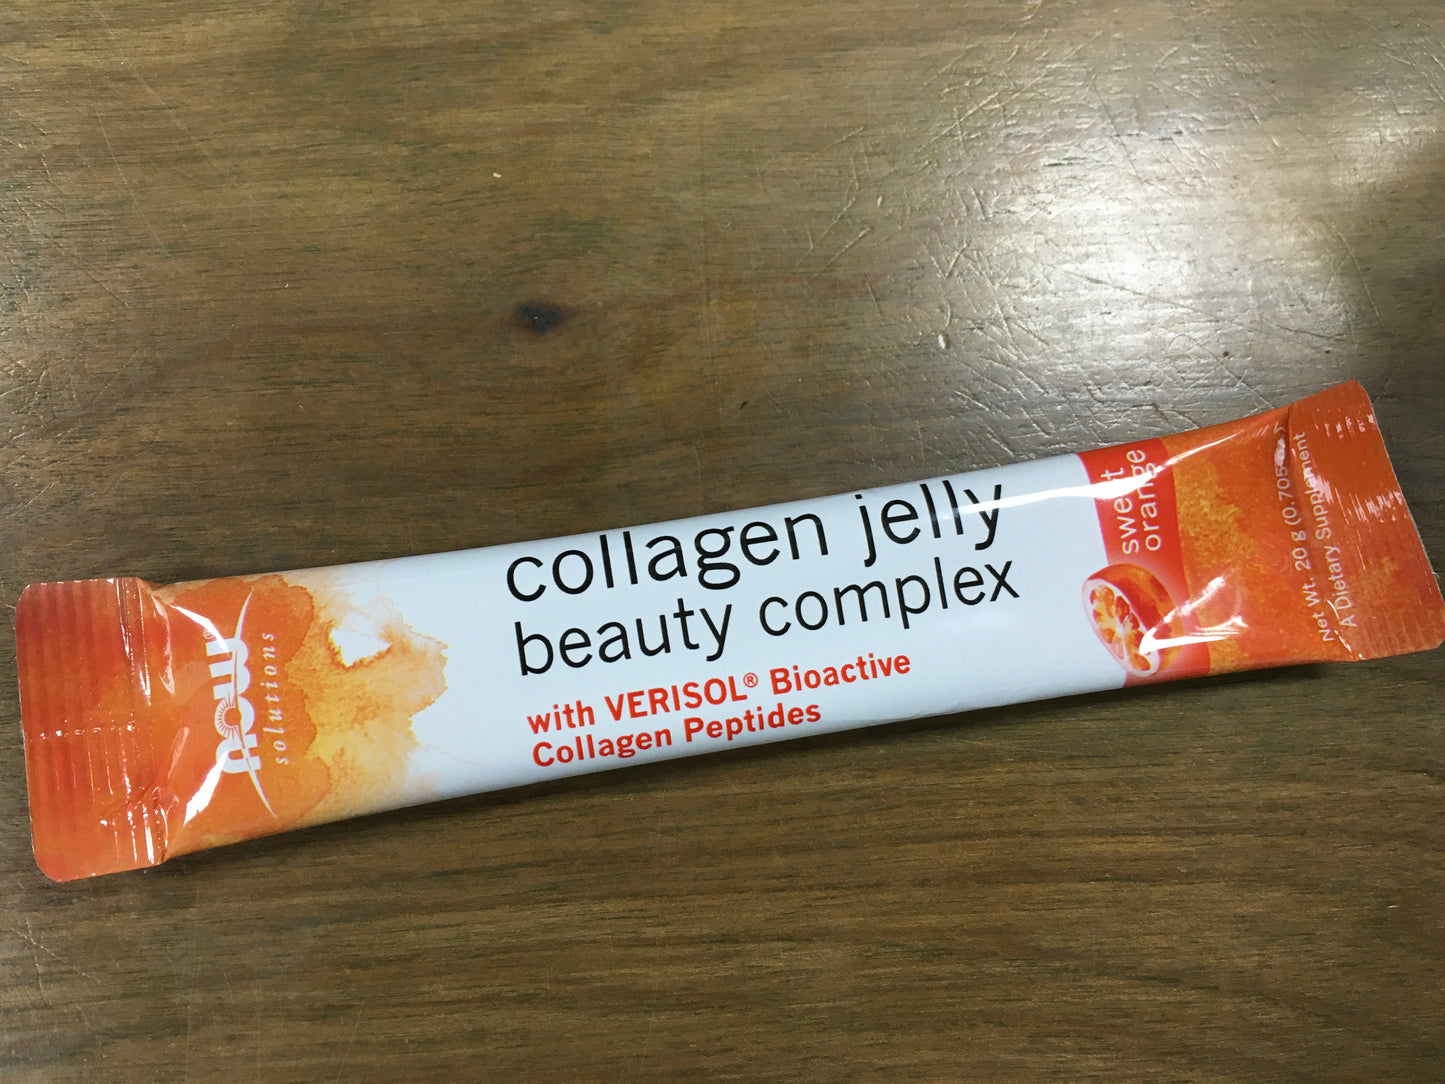 Collagen jelly beauty complex singles